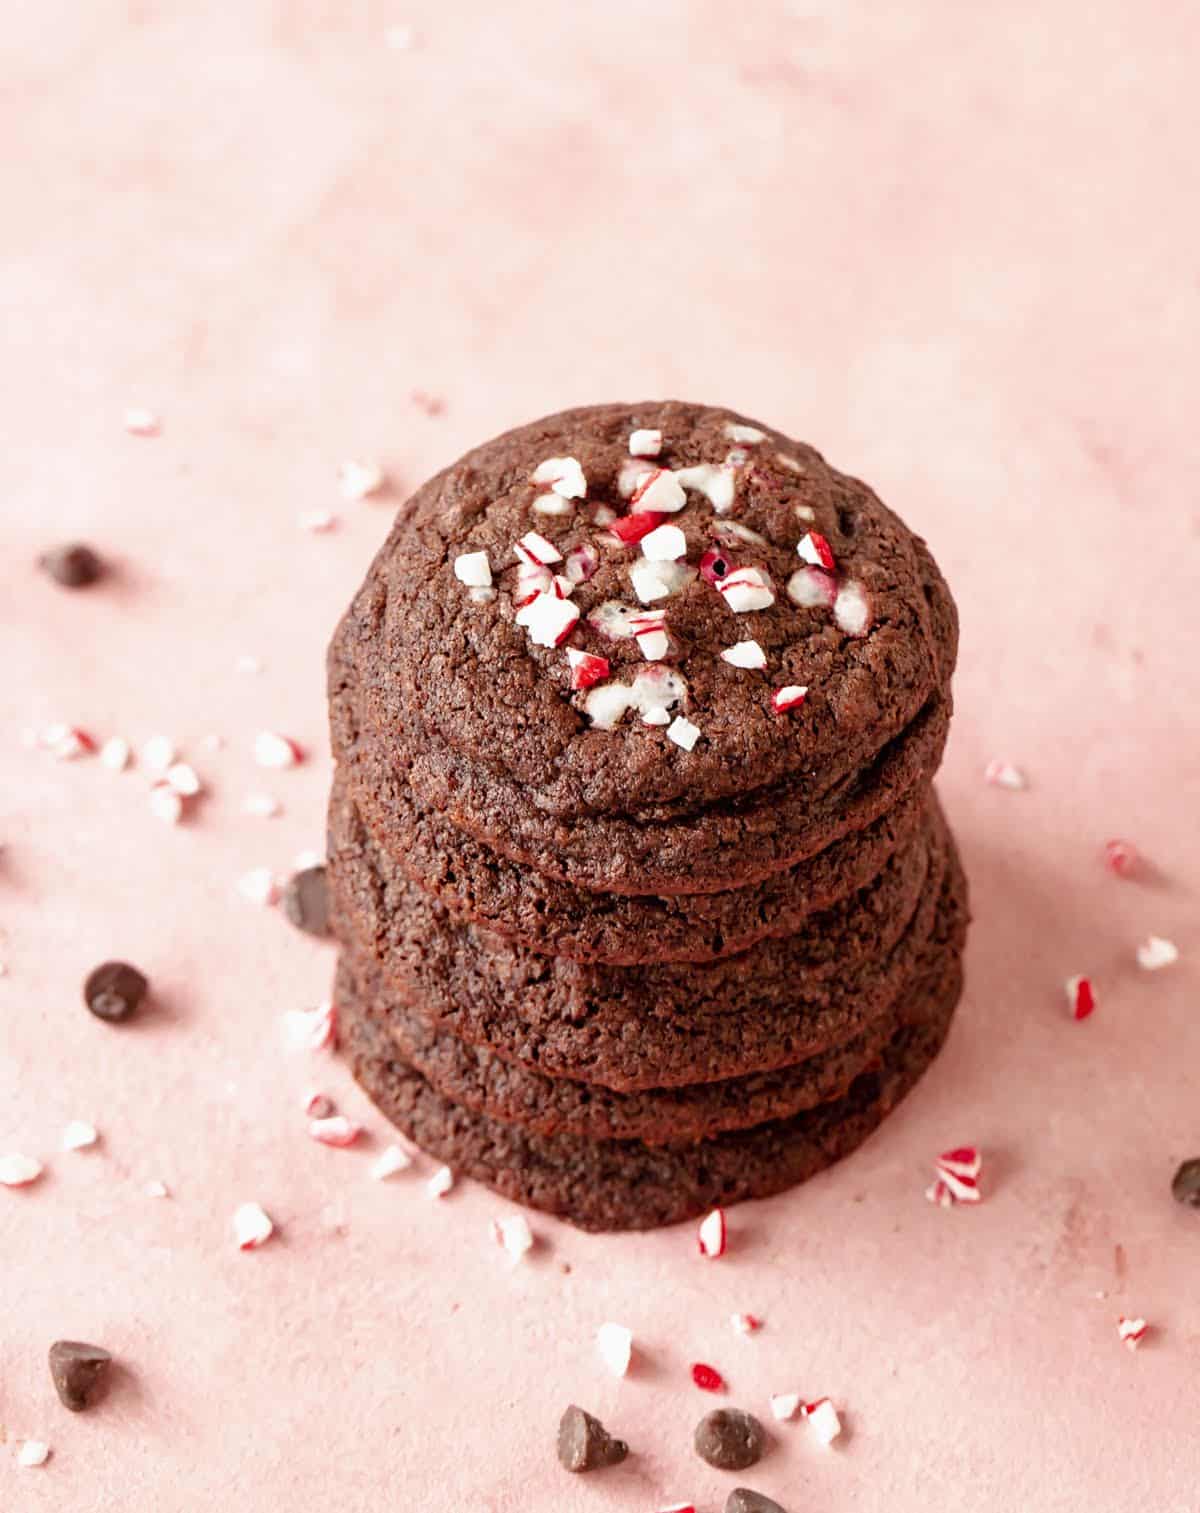 Several chocolate peppermint cookies stacked on pink surface, crushed candy cane and chips around.